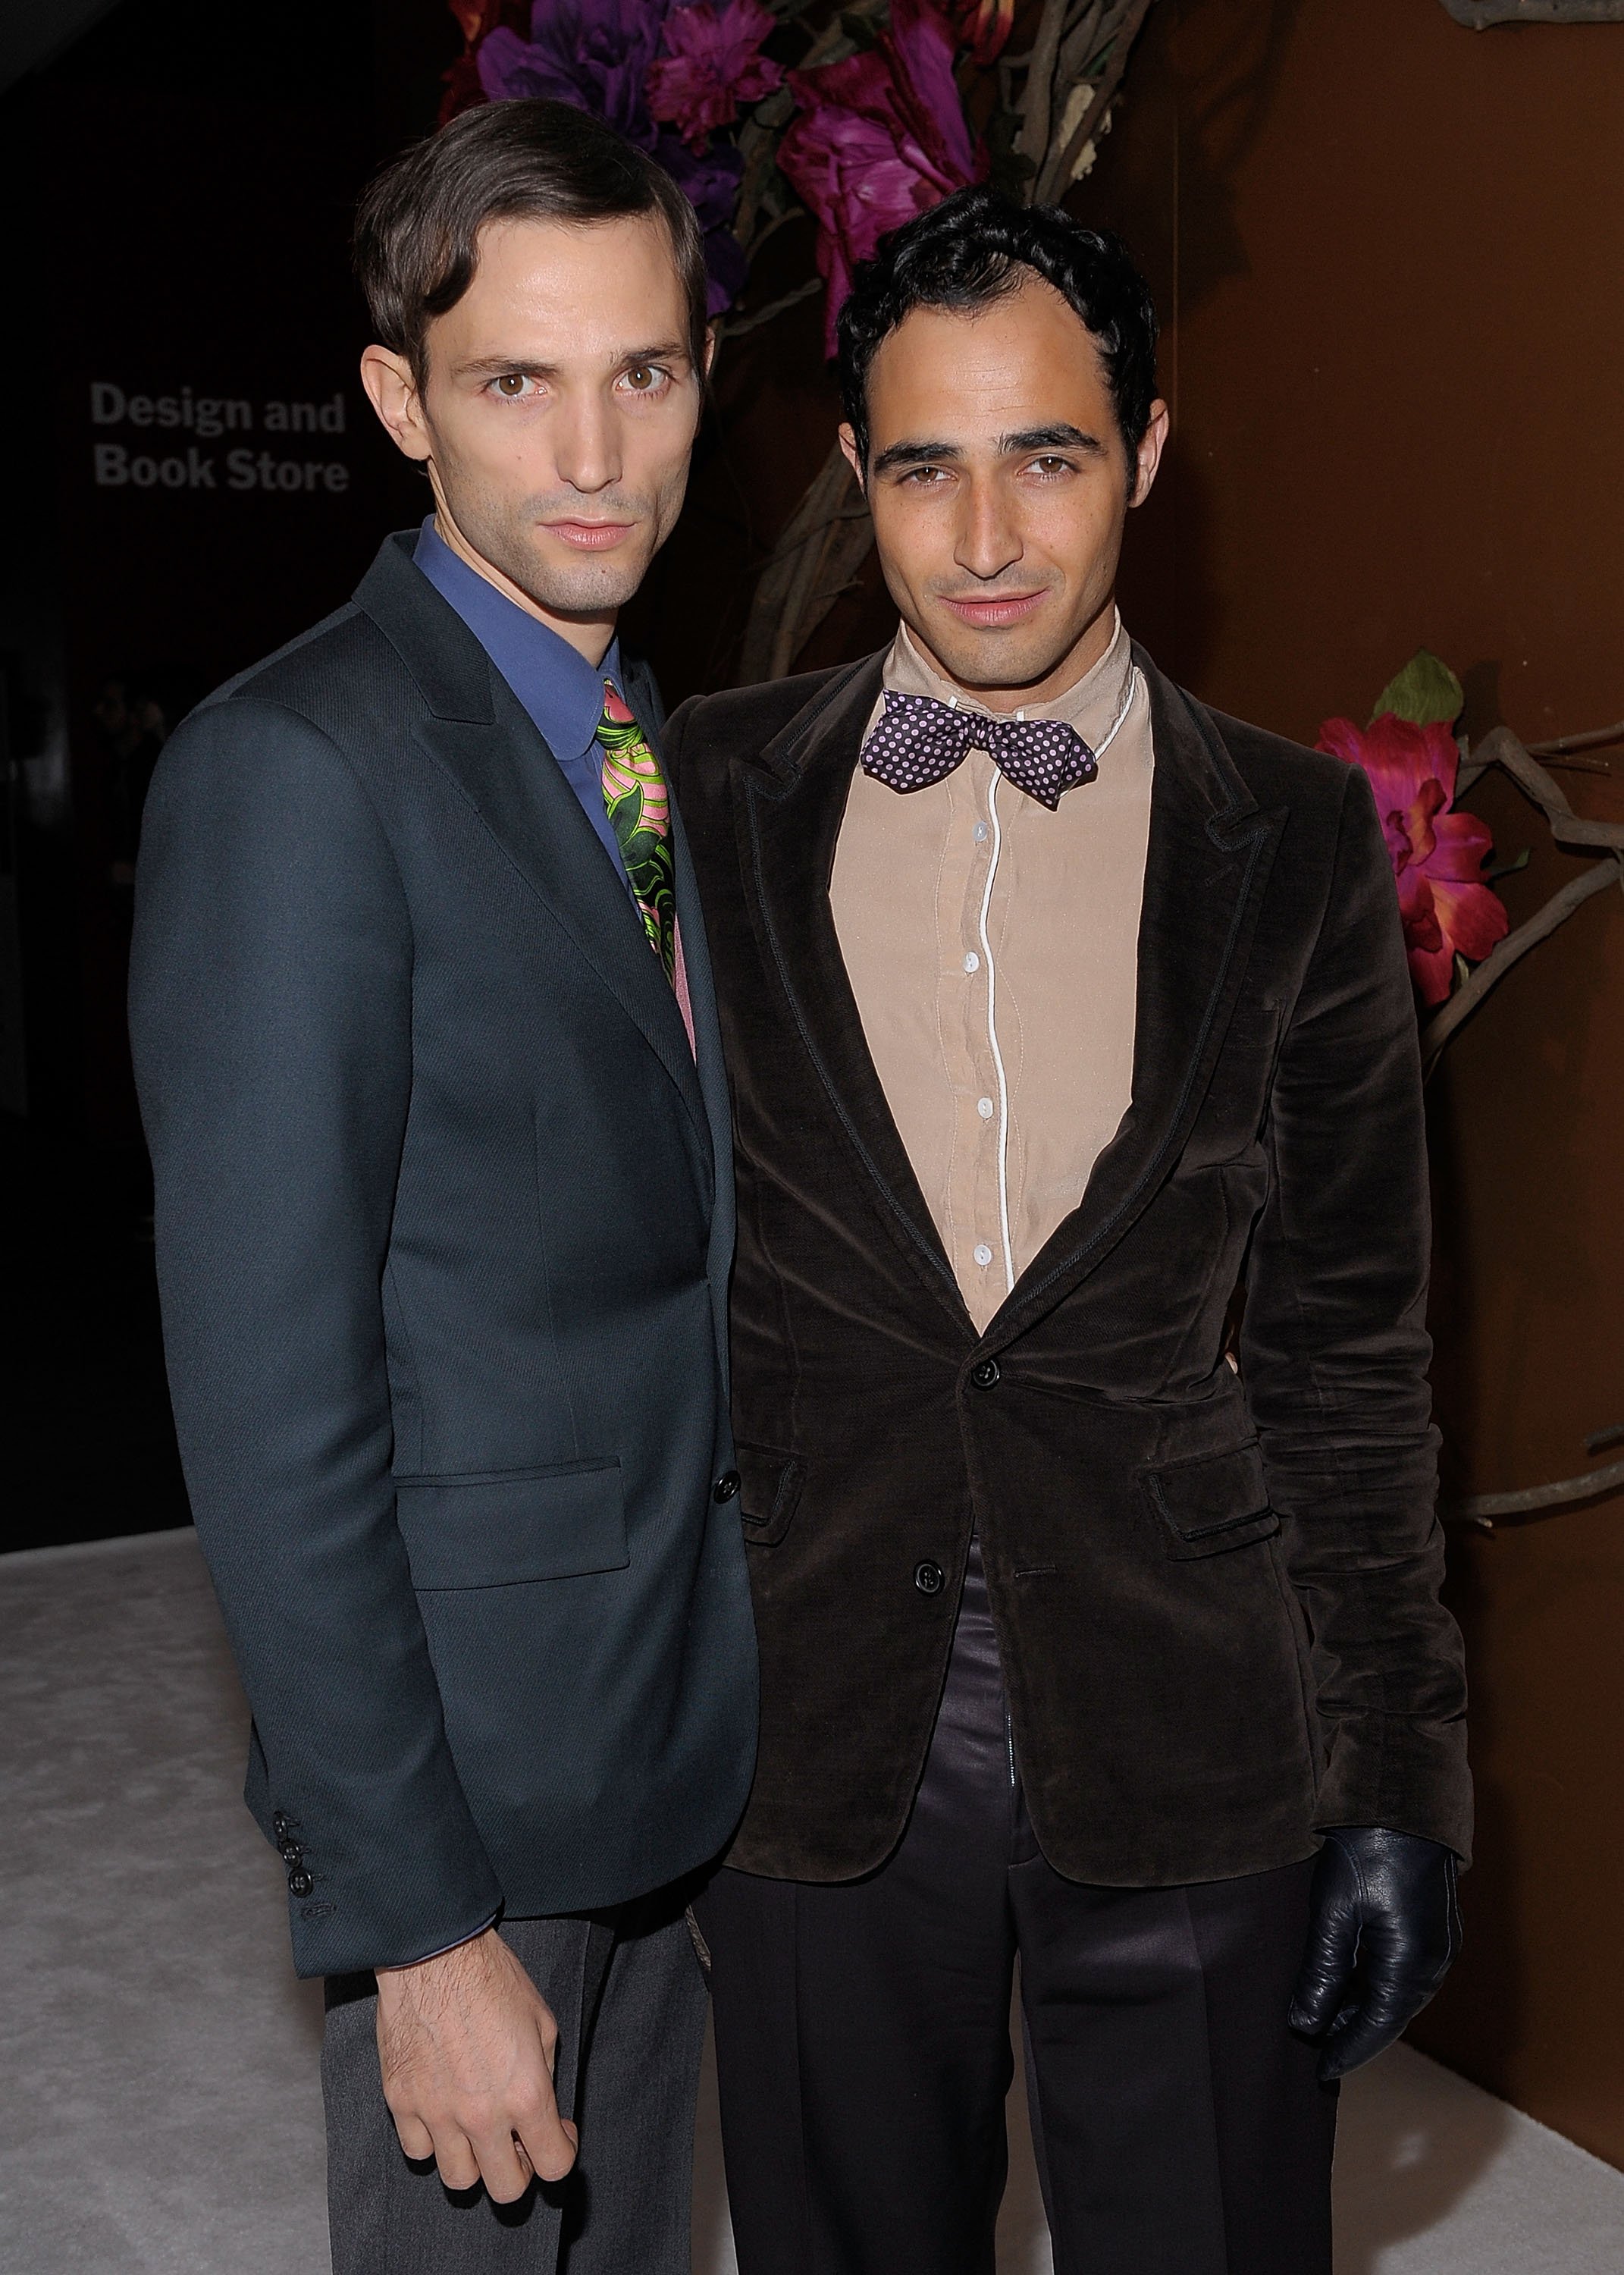 Zac Posen (Right) and Christopher Niquet attend the MoMA's Second Annual Film Benefit, Honoring Tim Burton at the MOMA on November 17, 2009, in New York. | Source: Getty Images.